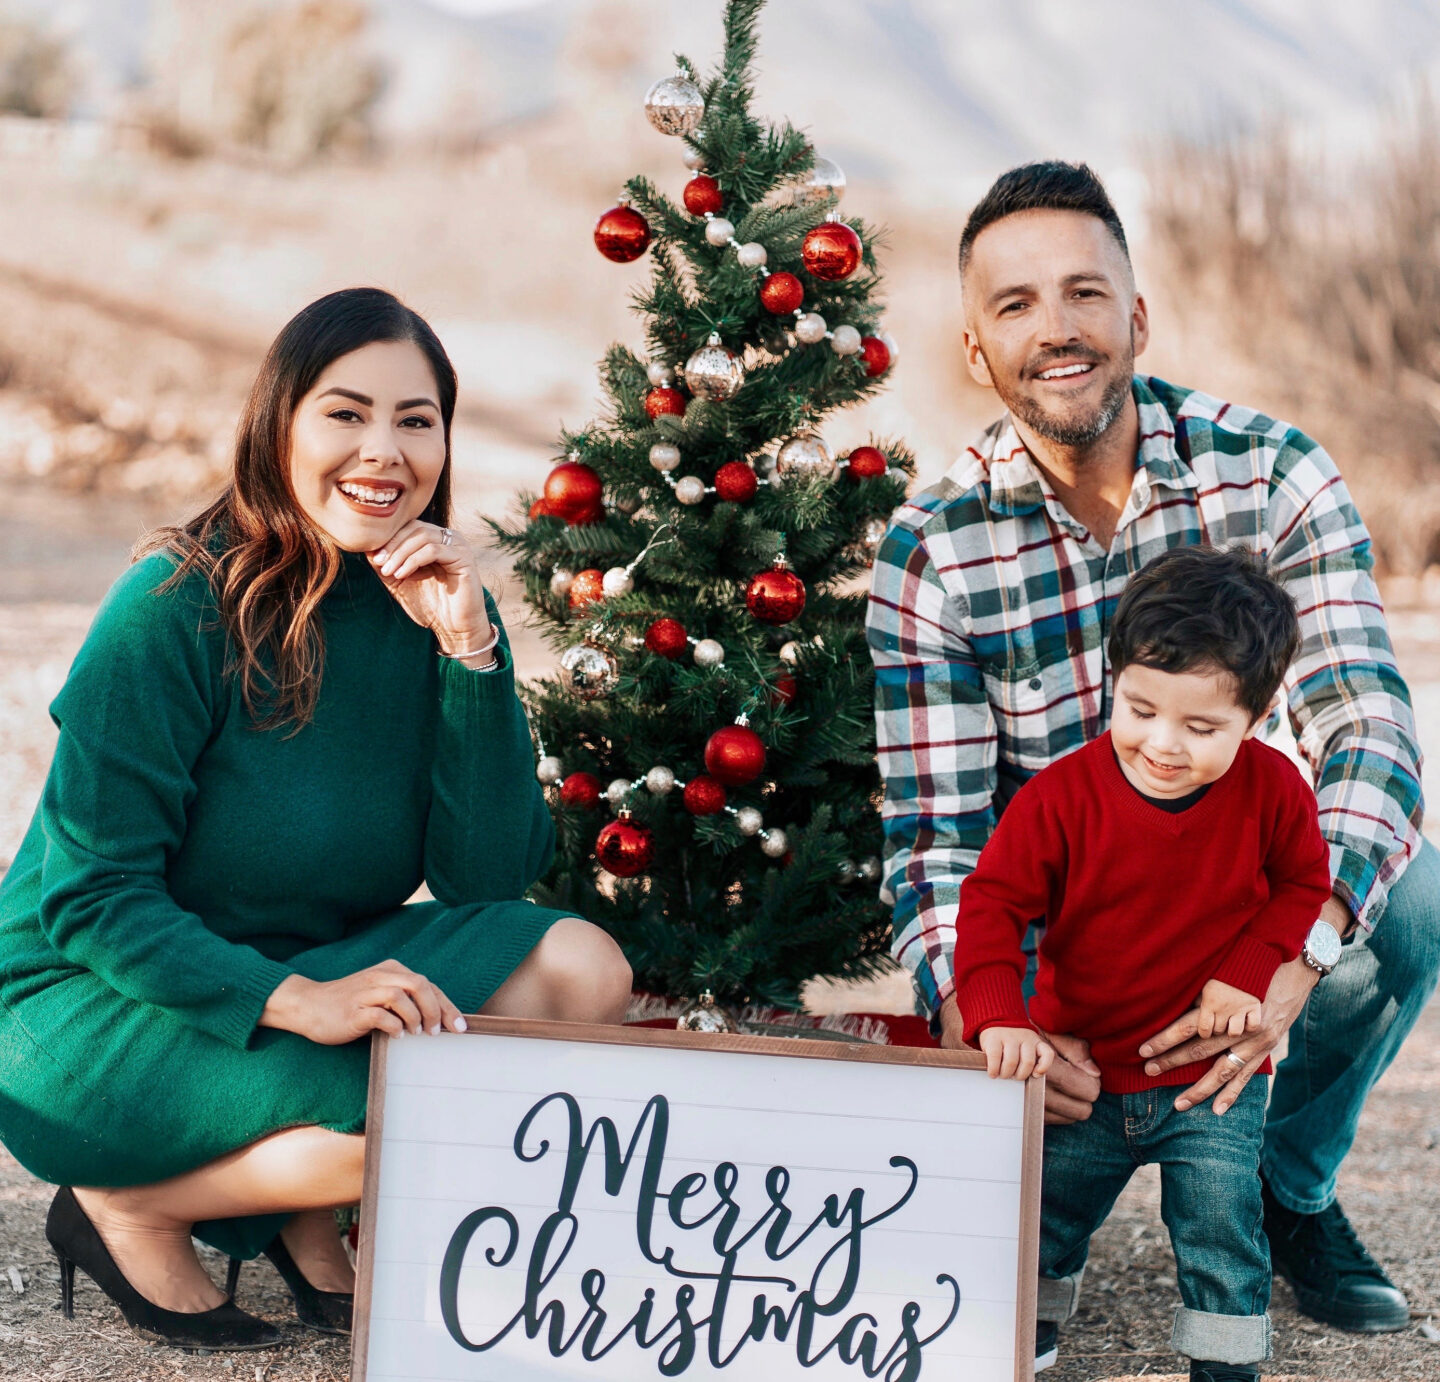 5 Poses to Show Your Best Smile for Holiday Photos